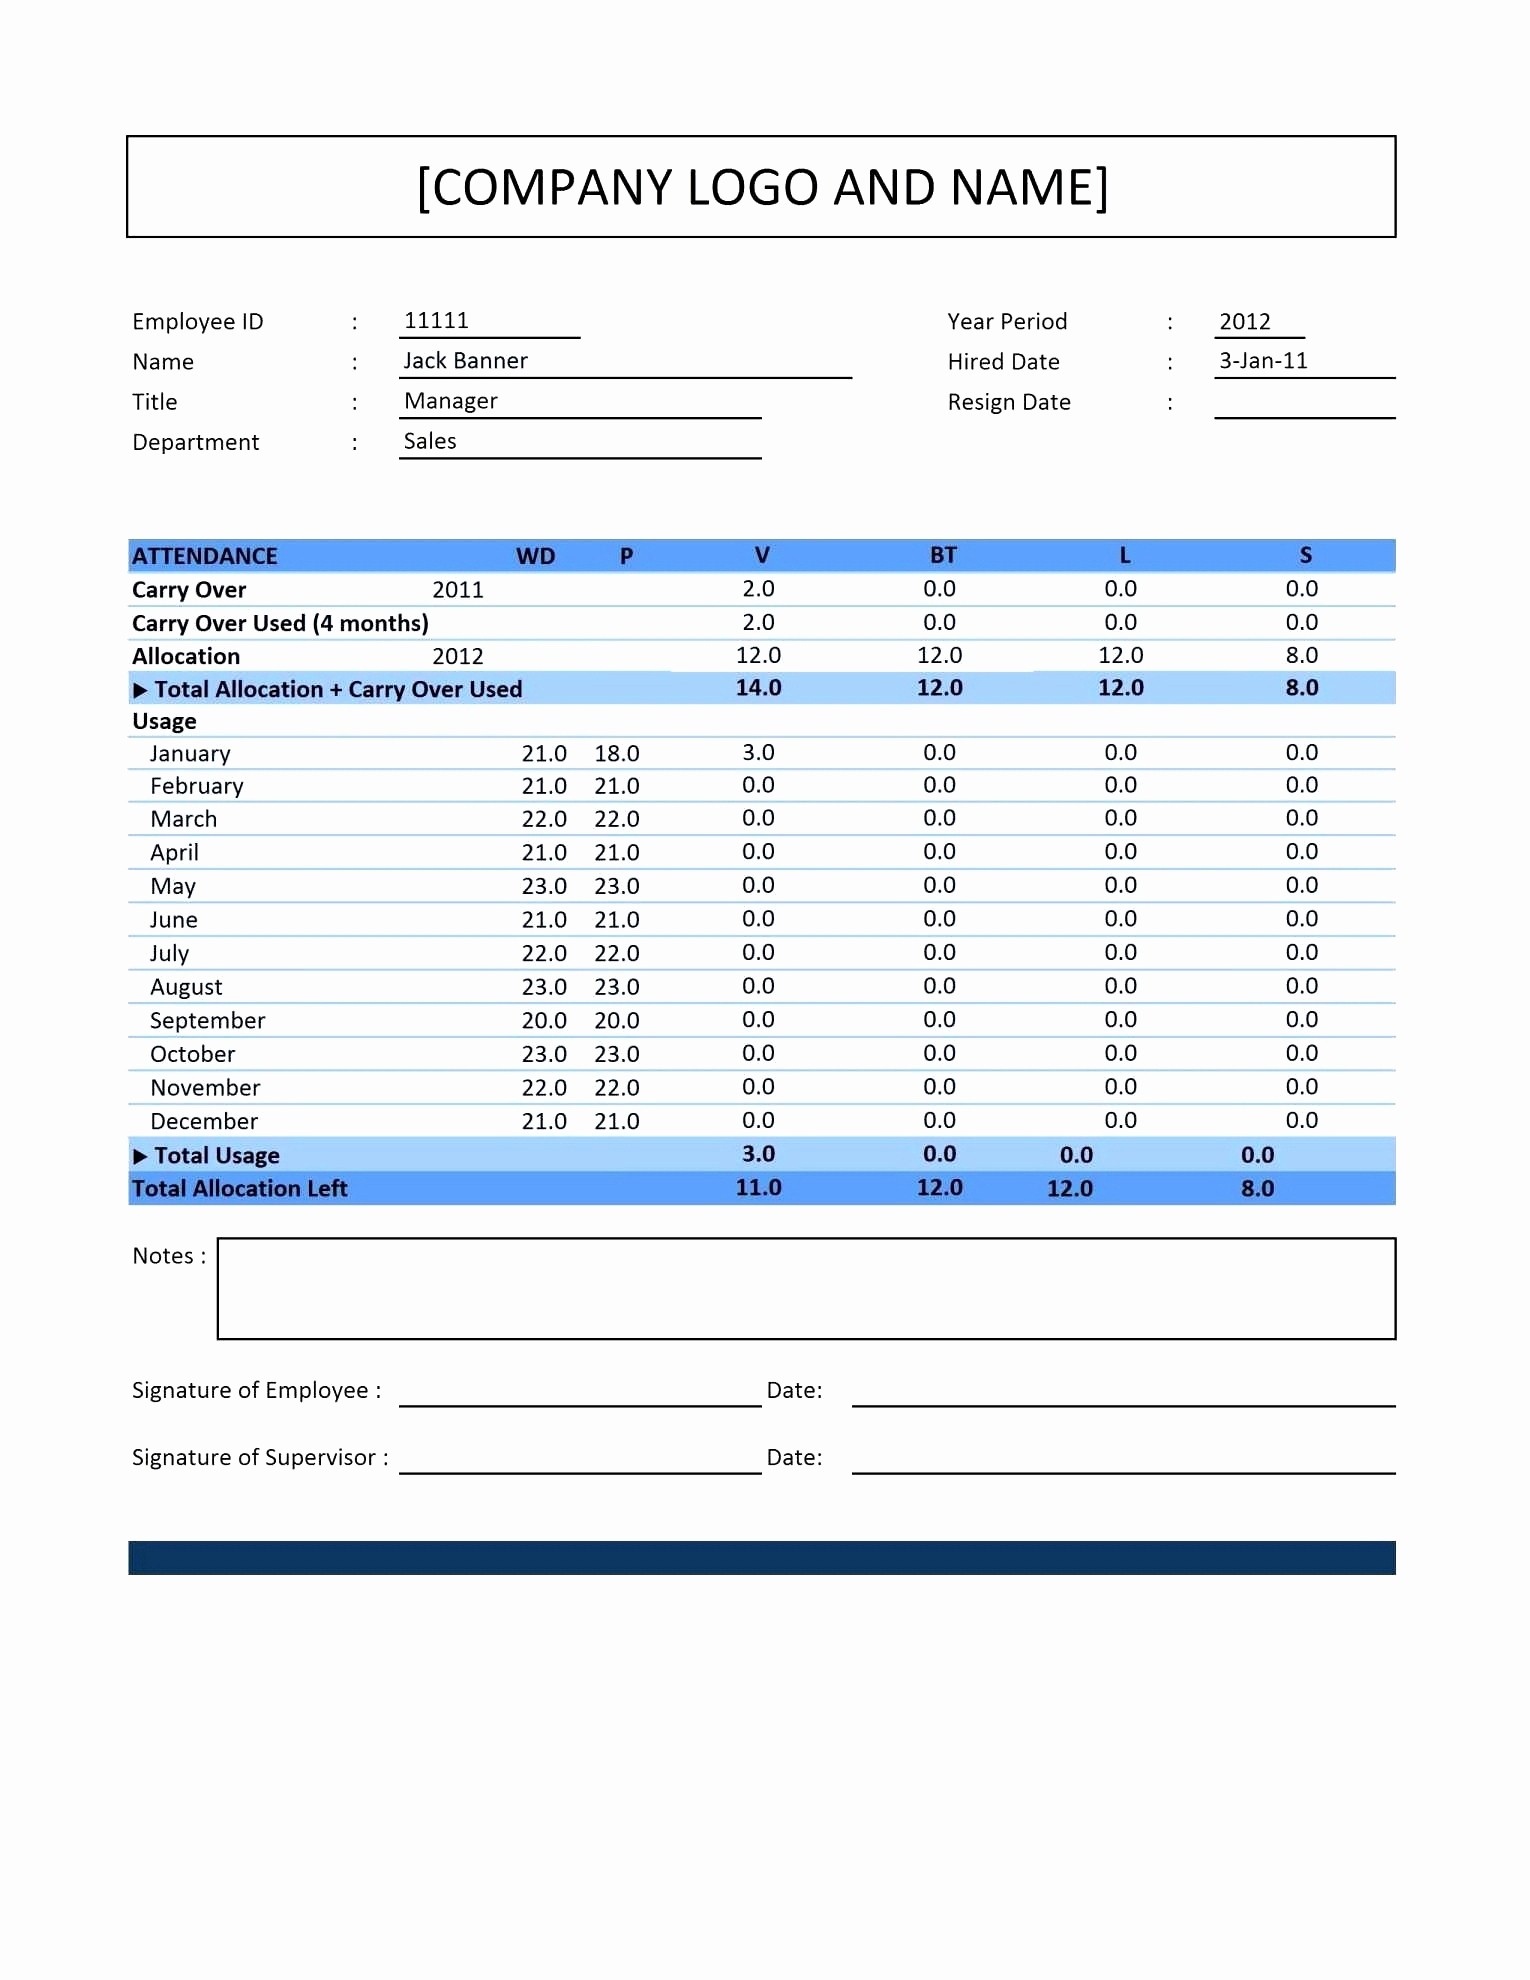 Vacation Accrual Spreadsheet Lovely Employee Document Excel Template